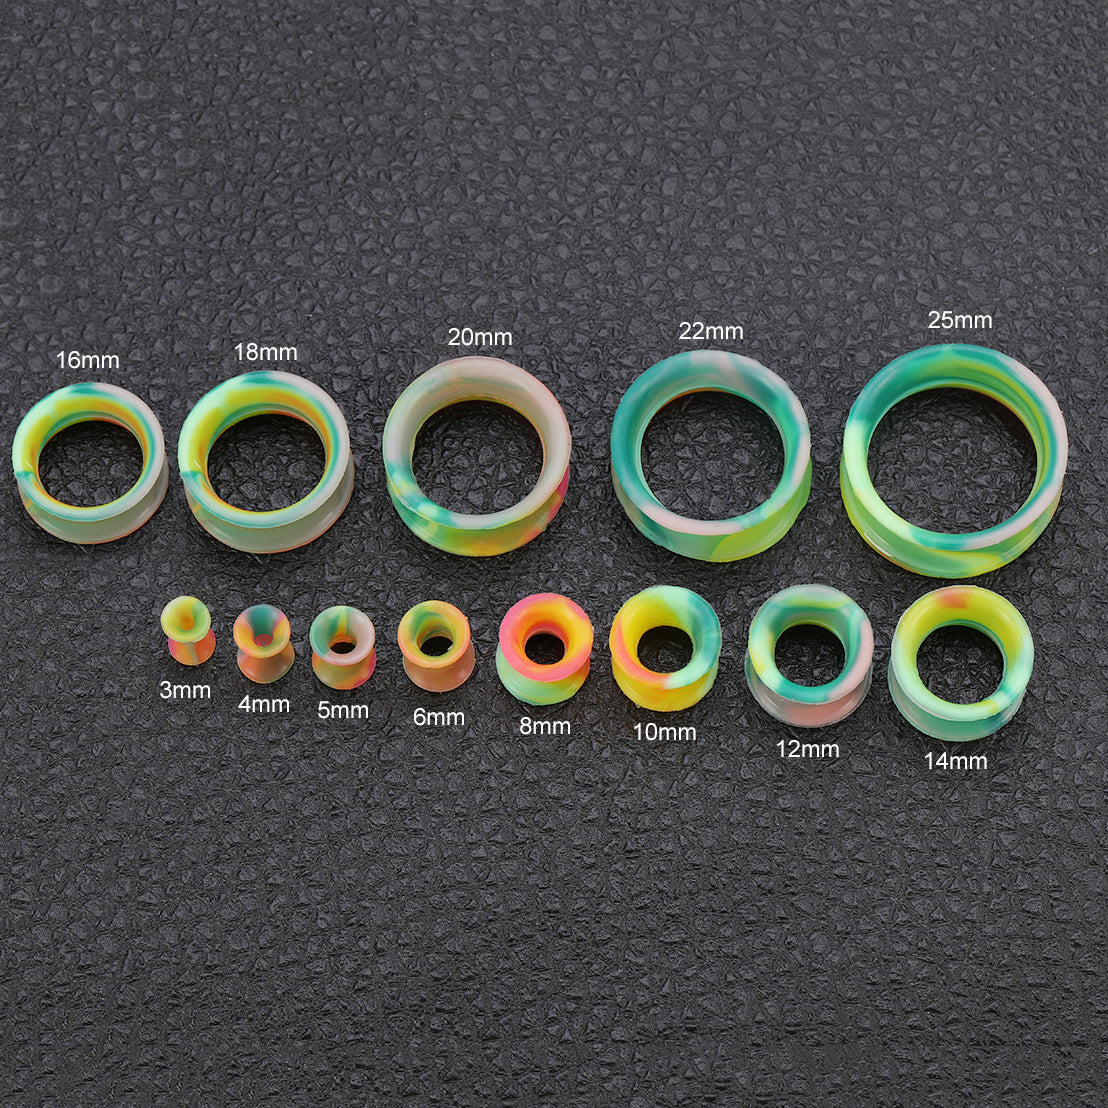 3-25mm-Thin-Silicone-Flexible-Green-Yellow-Red-Ear-plug-tunnel-Double-Flared-Expander-Ear-Gauges